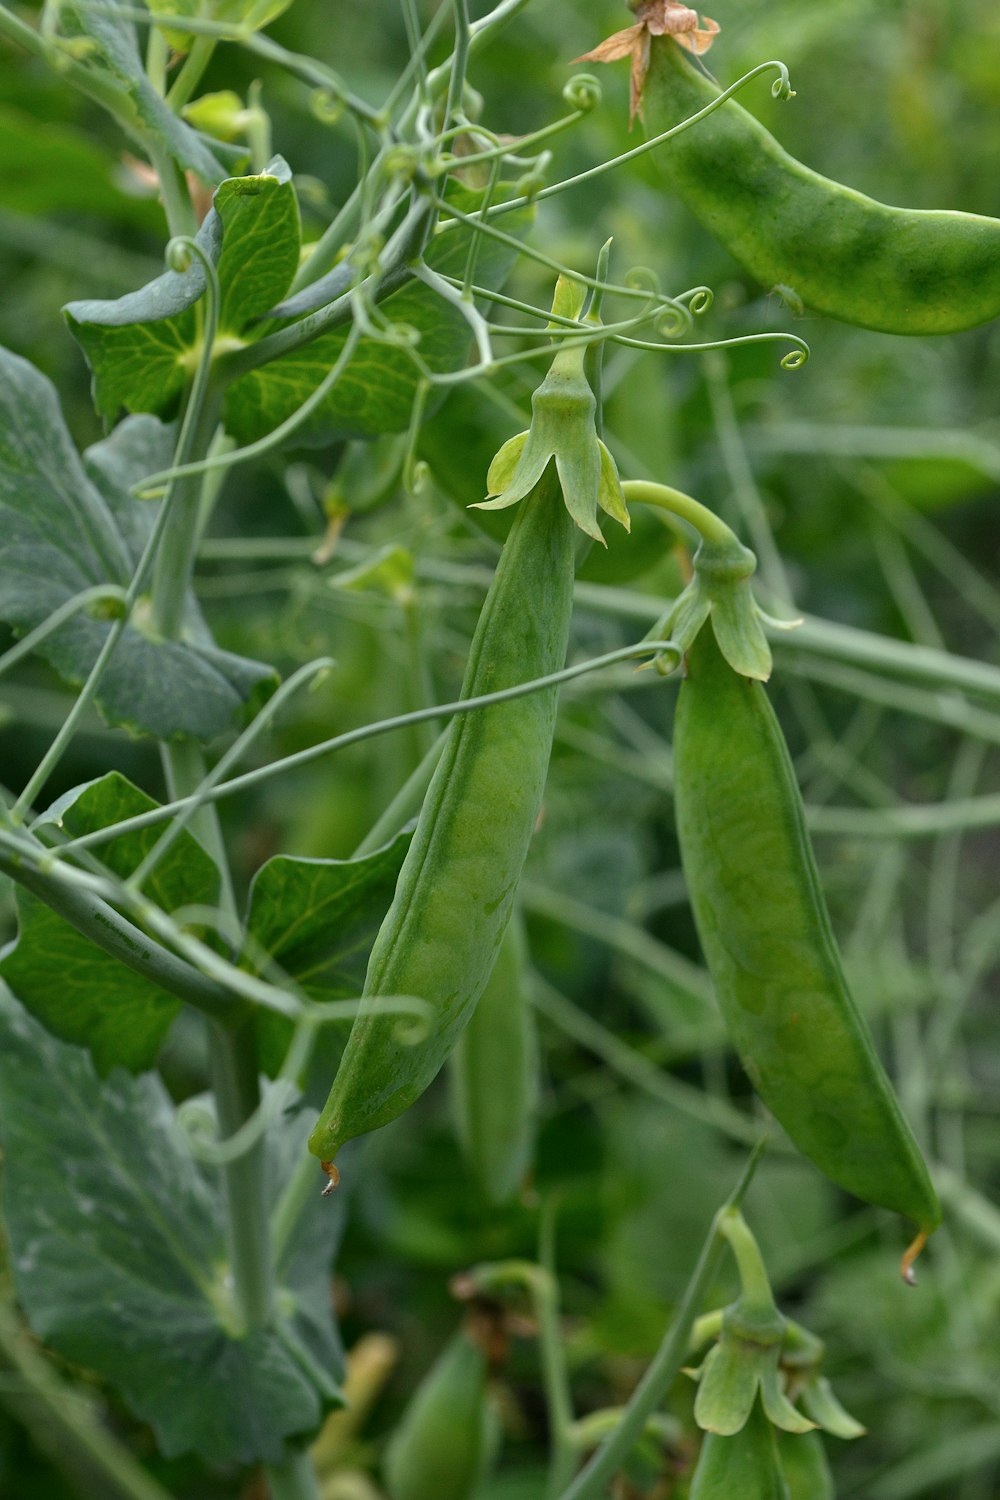 a close up of a green pea plant